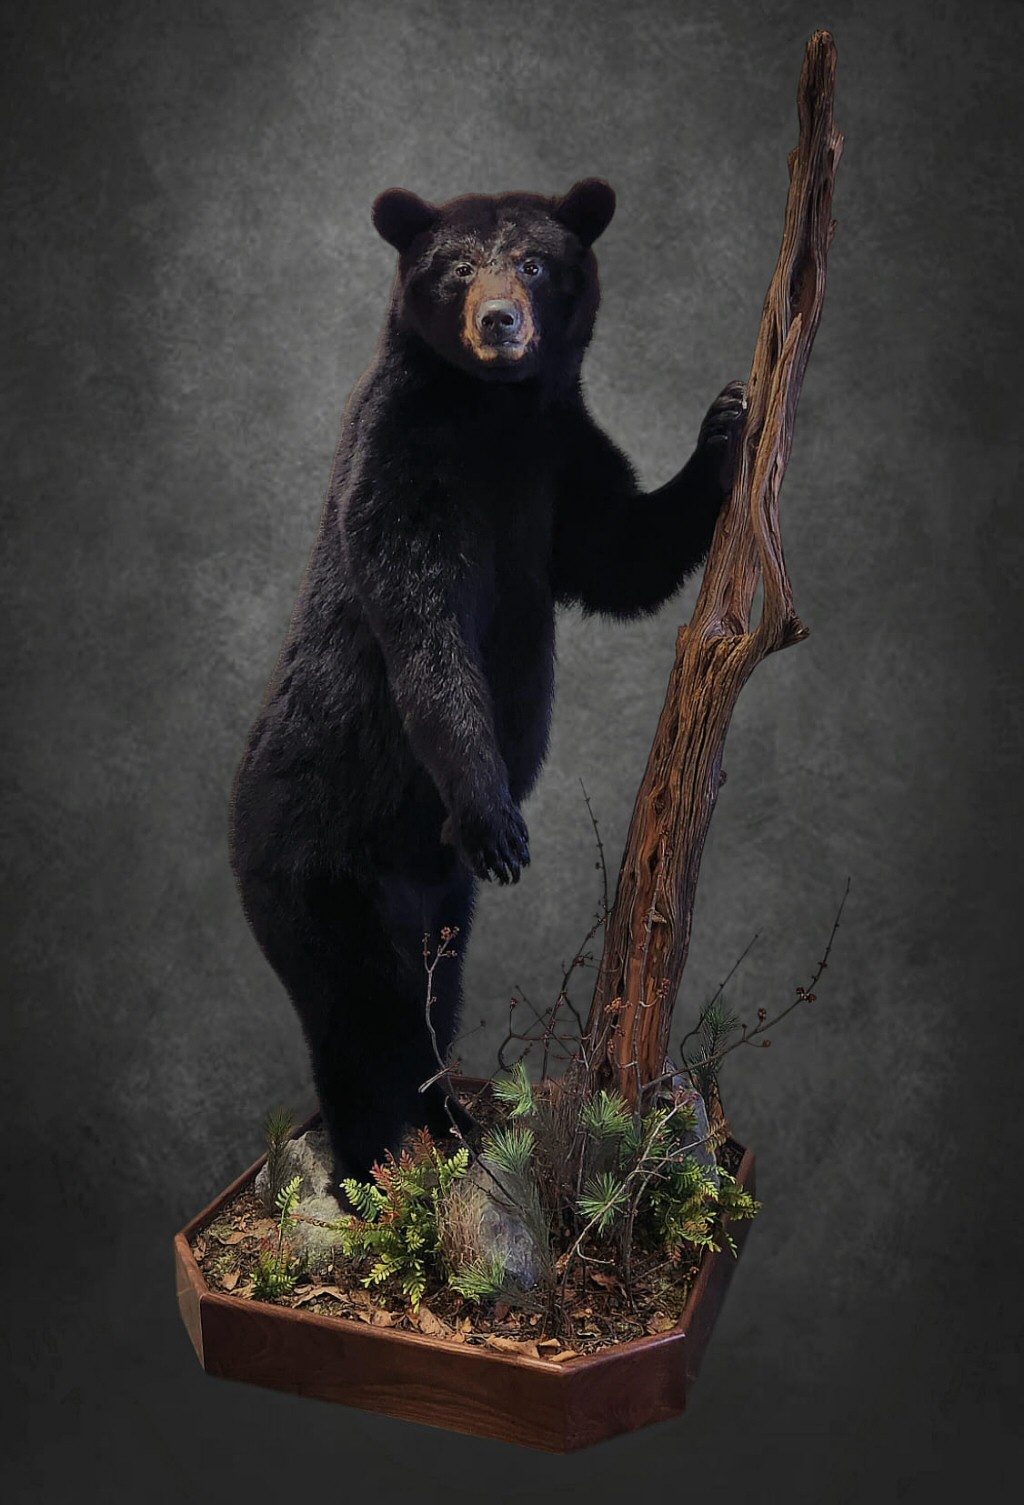 Black Bear Taxidermy Life Size Taxidermy Mounts - Bears Mounted Life Size On Branches, Trees, Logs - Bears Mounted Life Size On Rocks On Floors - Black Bear Taxidermy Life Size Floor Mounts - Bear Taxidermy Ideas - Bear Mount Ideas